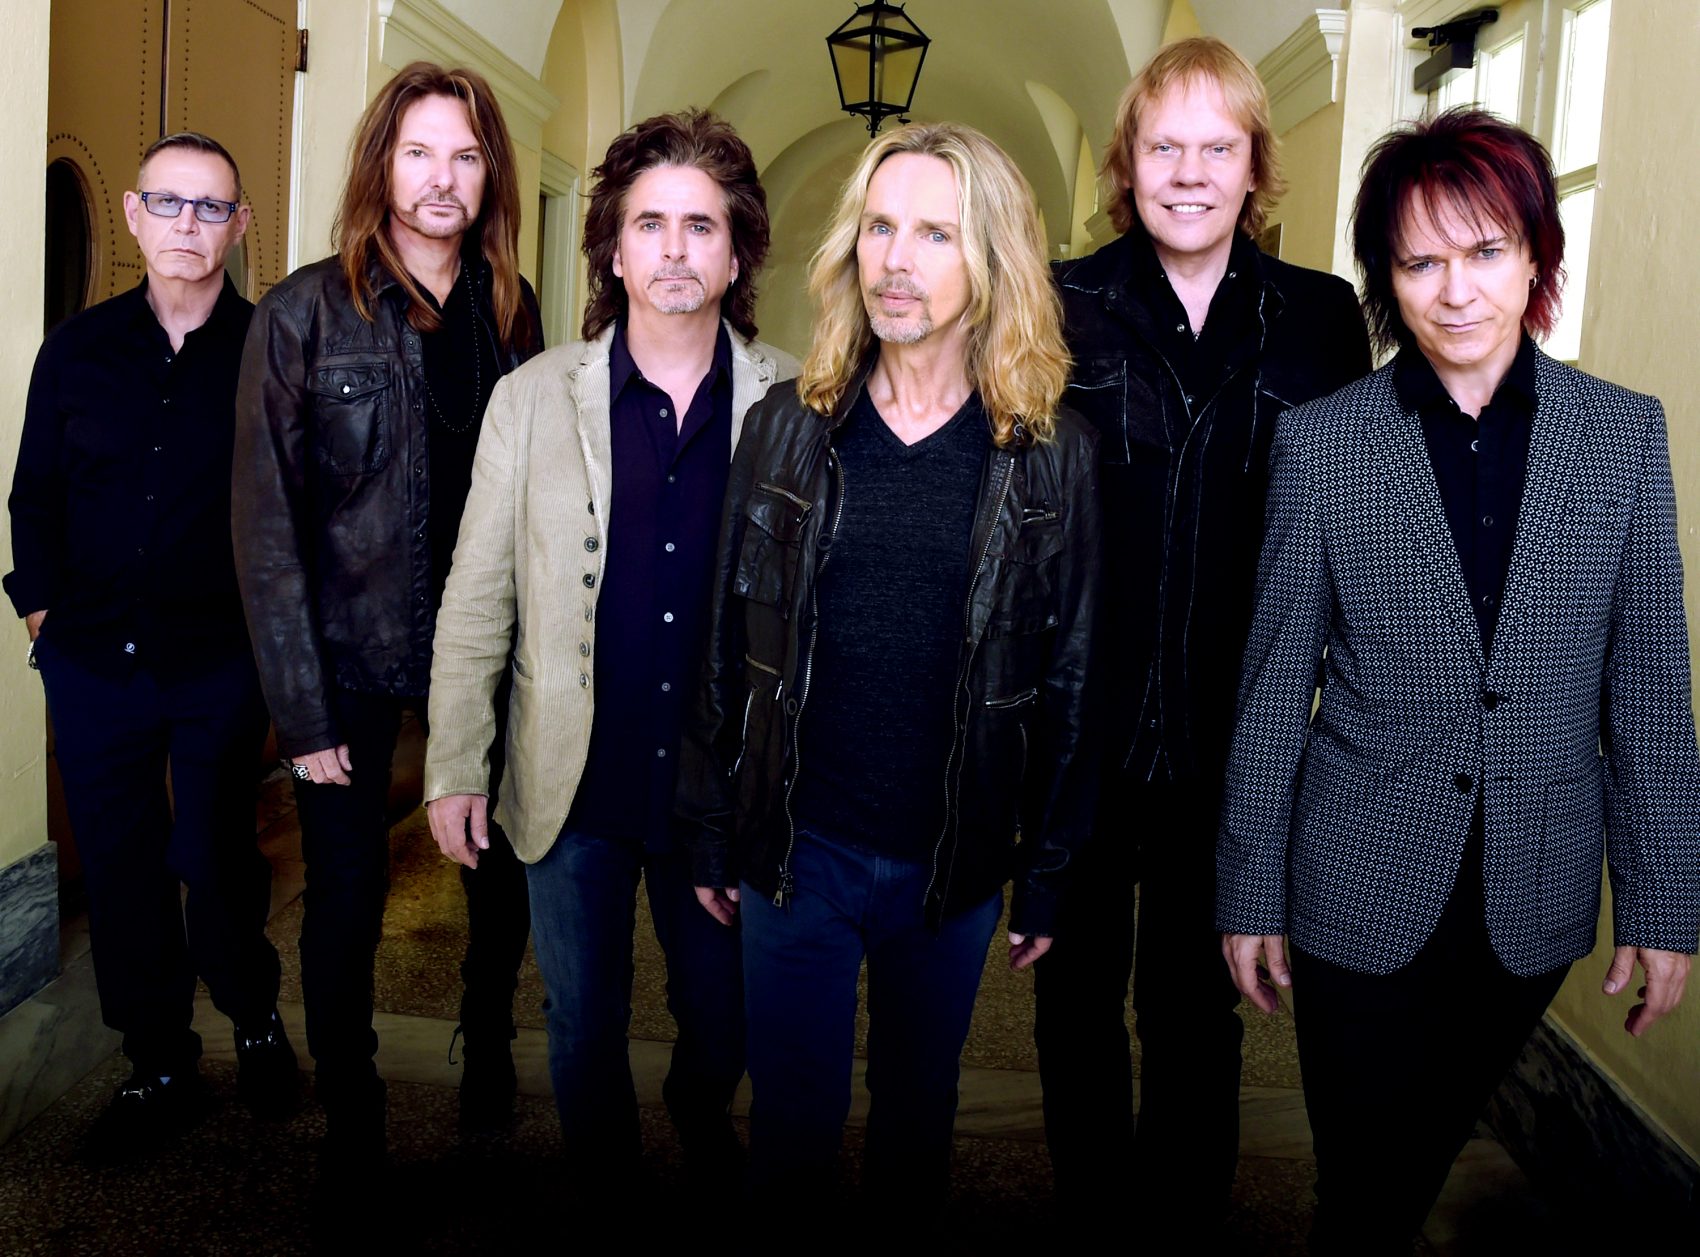 Styx members Chuck Panozzo, Ricky Phillips, Todd Sucherman, Tommy Shaw, James &quot;J.Y.&quot; Young and Lawrence Gowan in 2014. (Courtesy Rick Diamond/Getty Images for STYX)